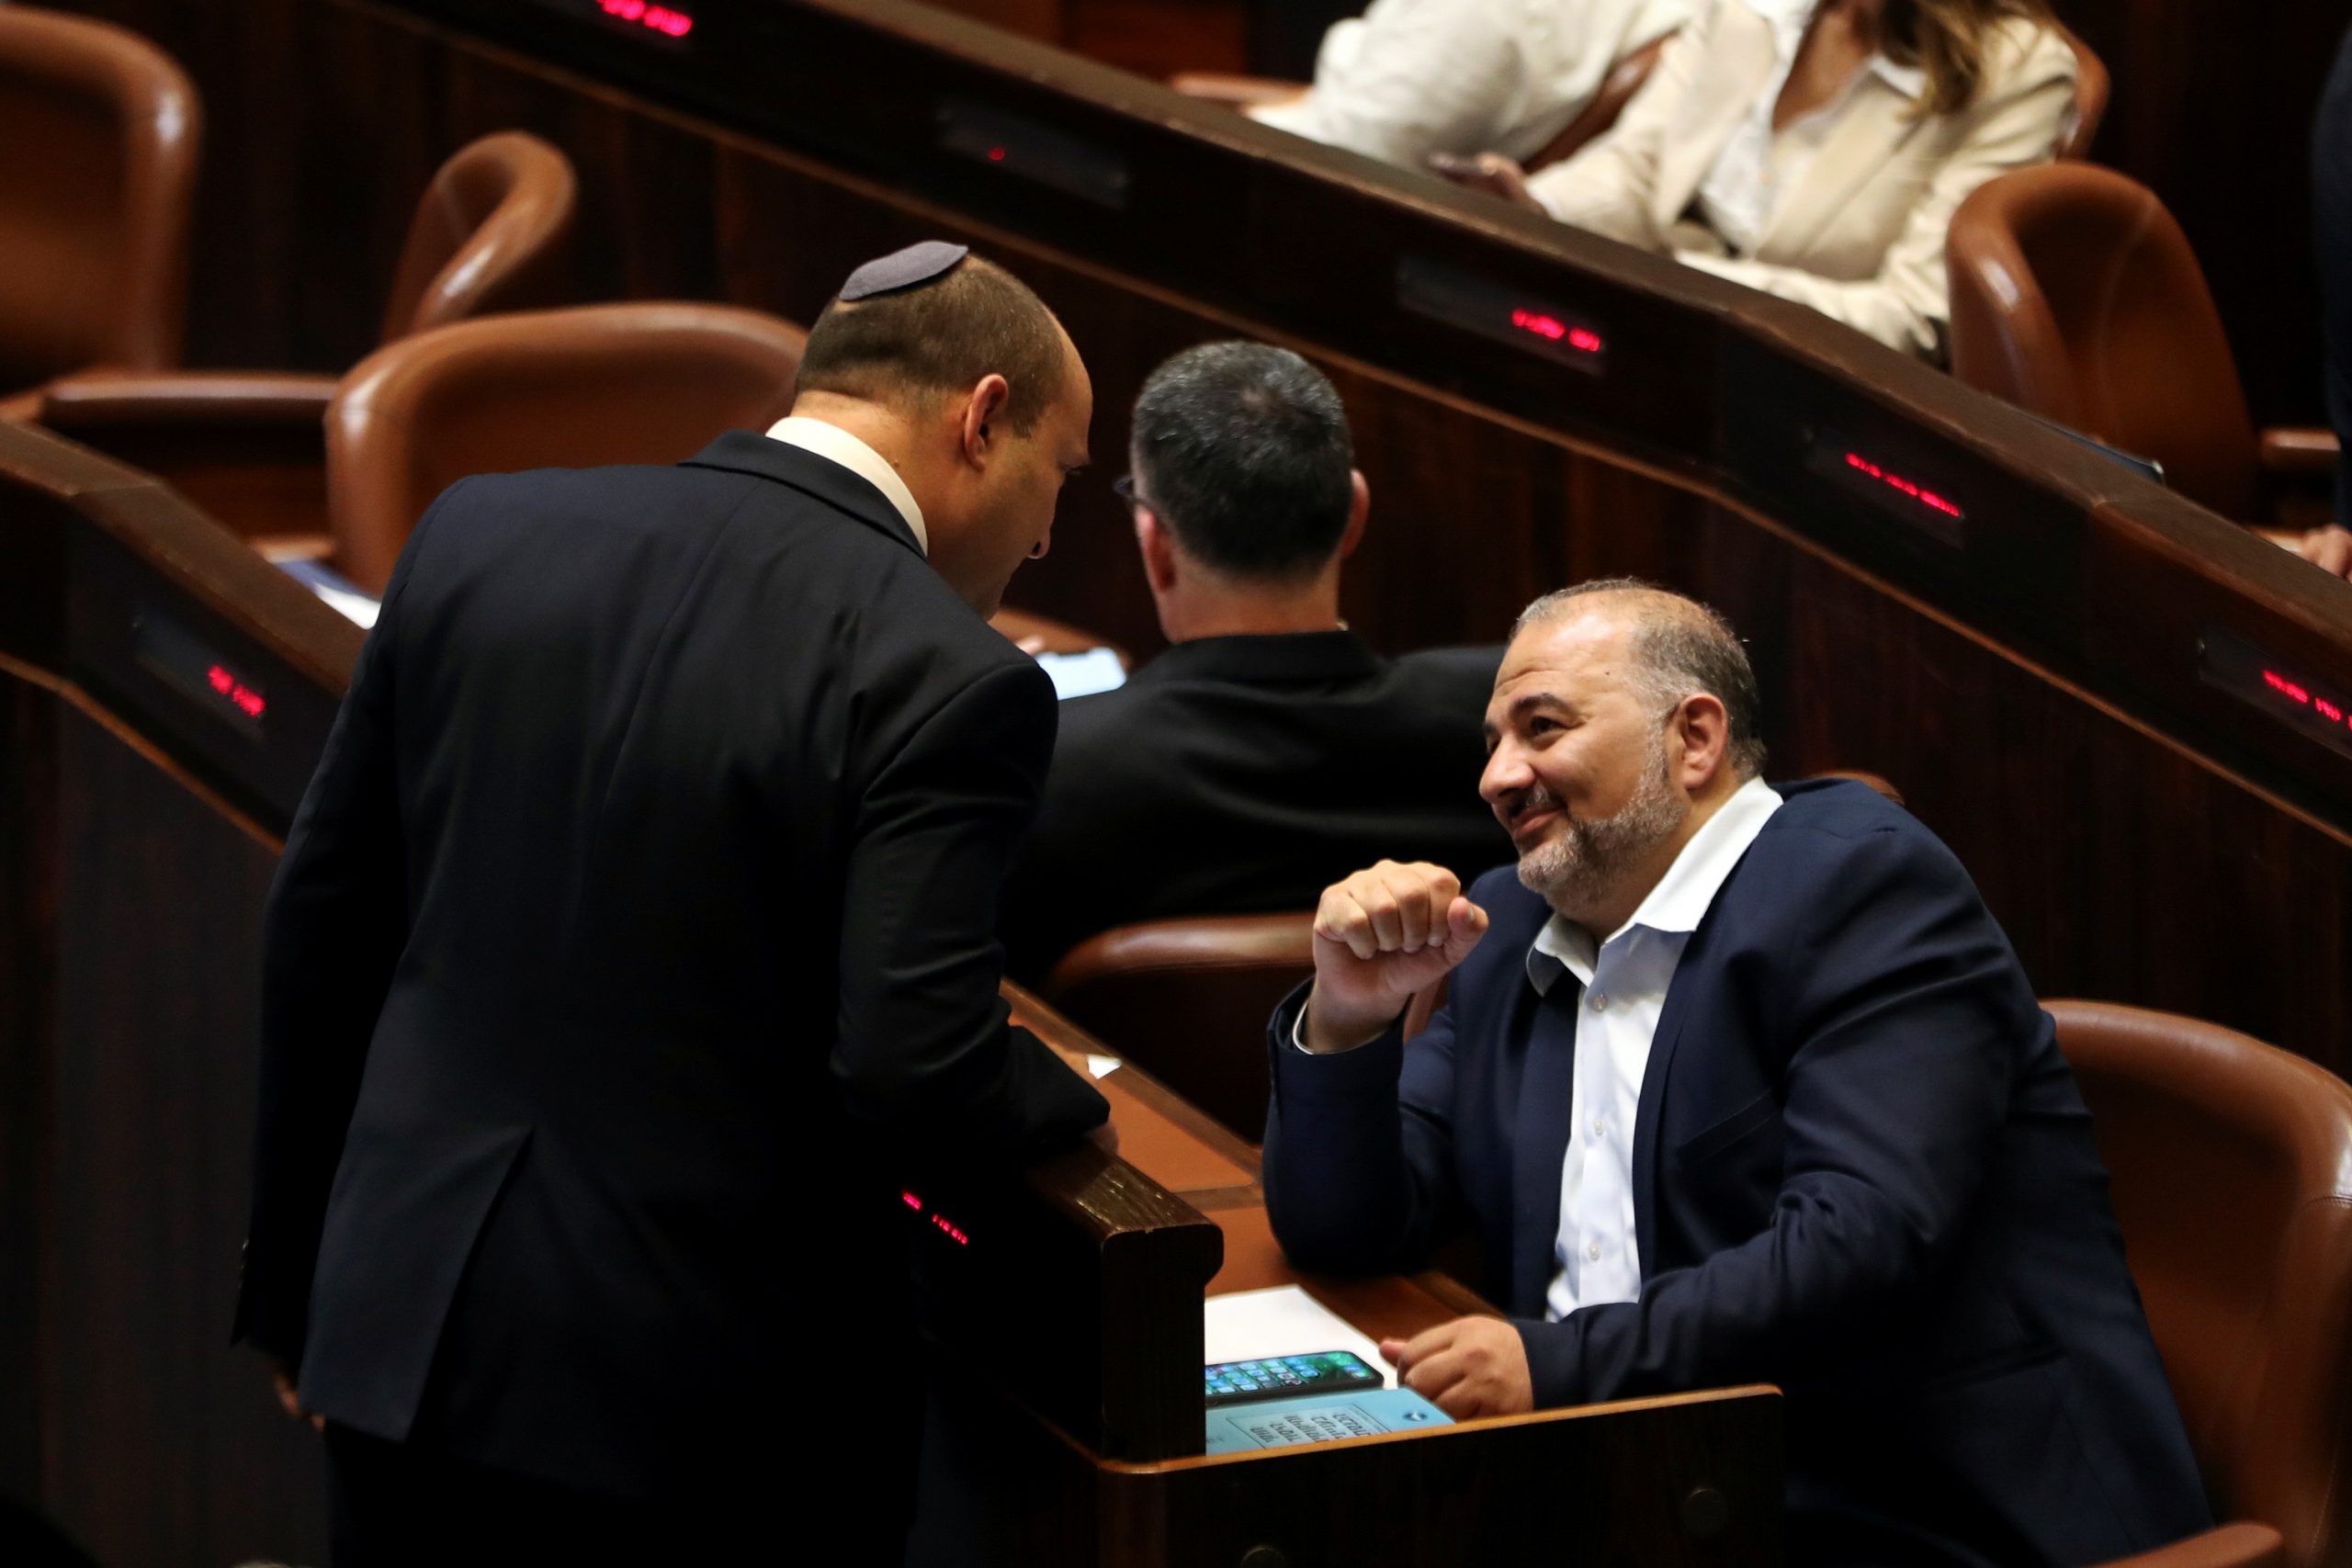 The new normal, or an unstable political reality? Prime Minister Bennett and head of Ra’am Abbas